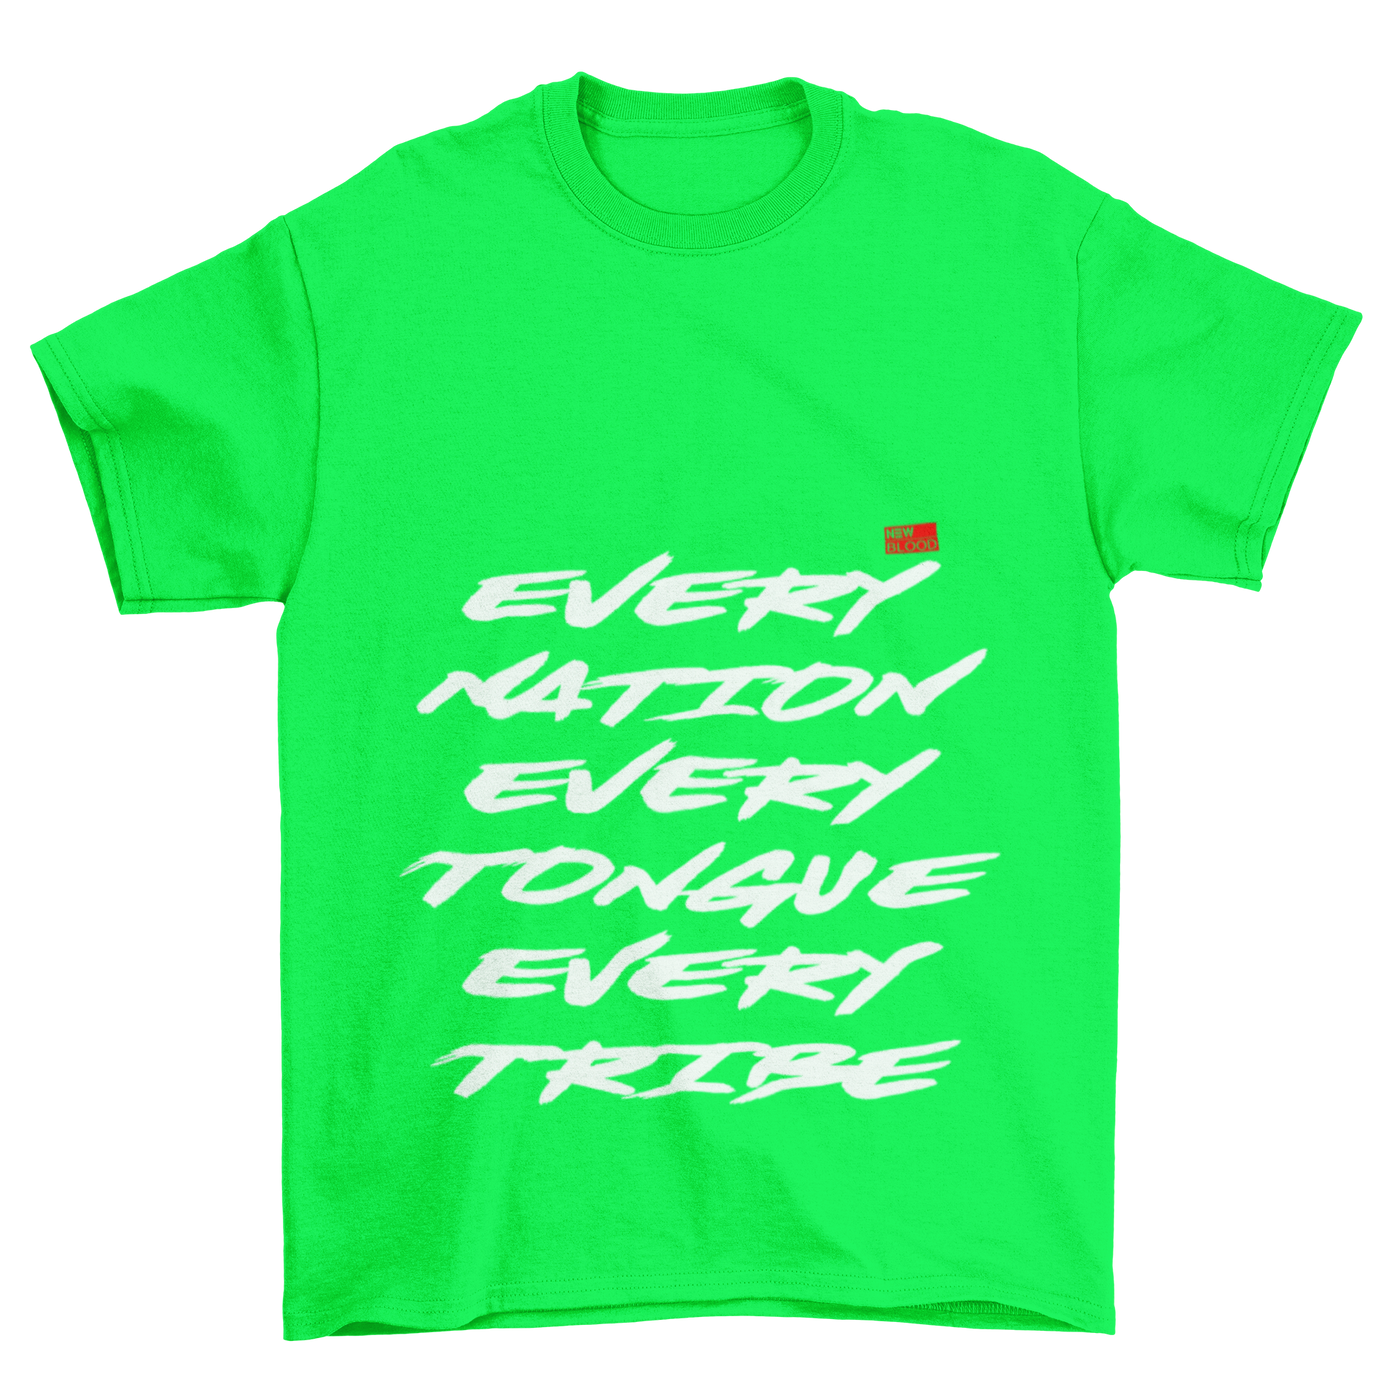 EVERY NATION TONGUE & TRIBE - T-Shirt